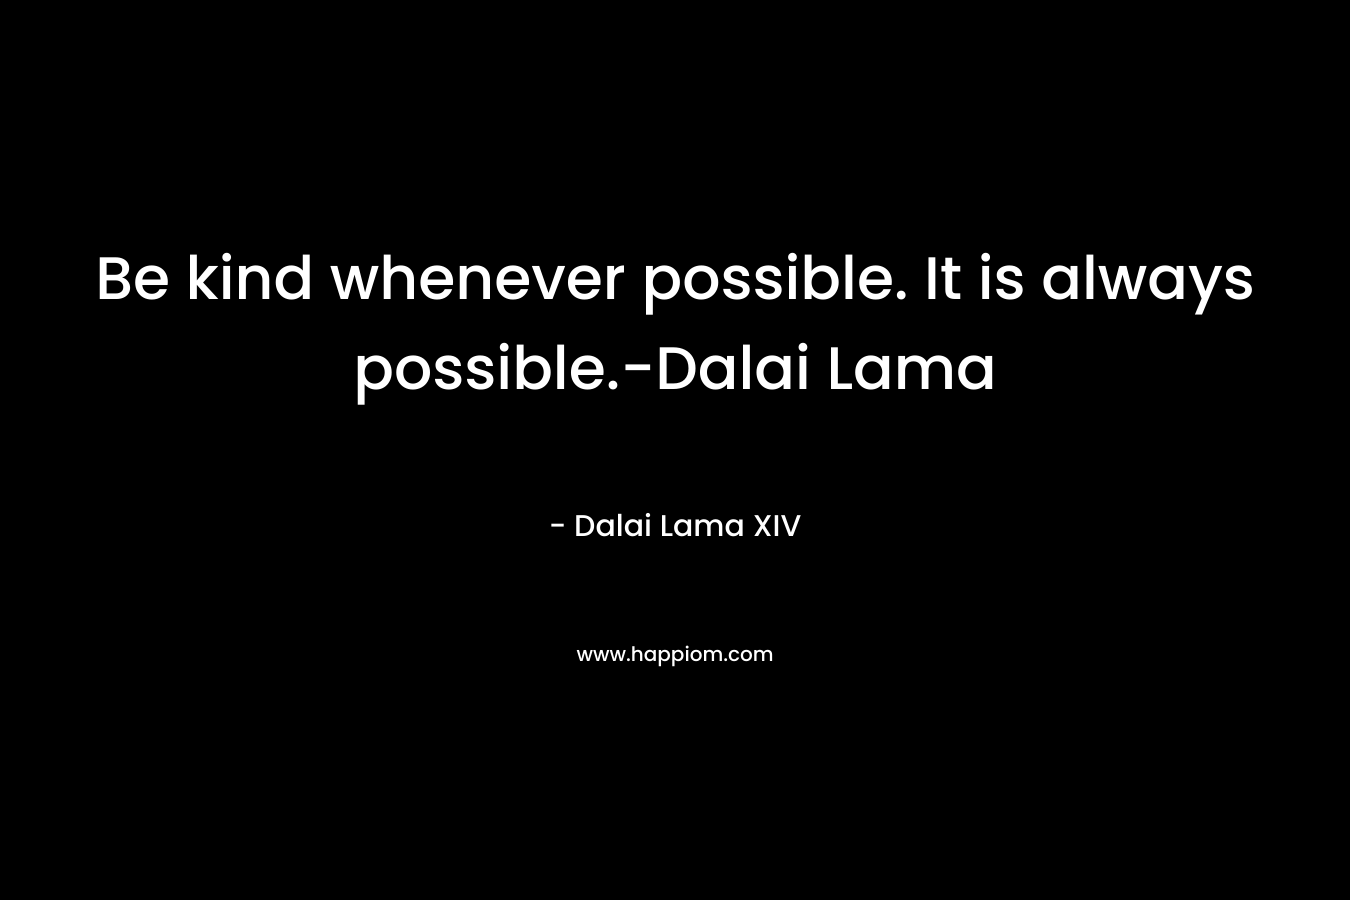 Be kind whenever possible. It is always possible.-Dalai Lama